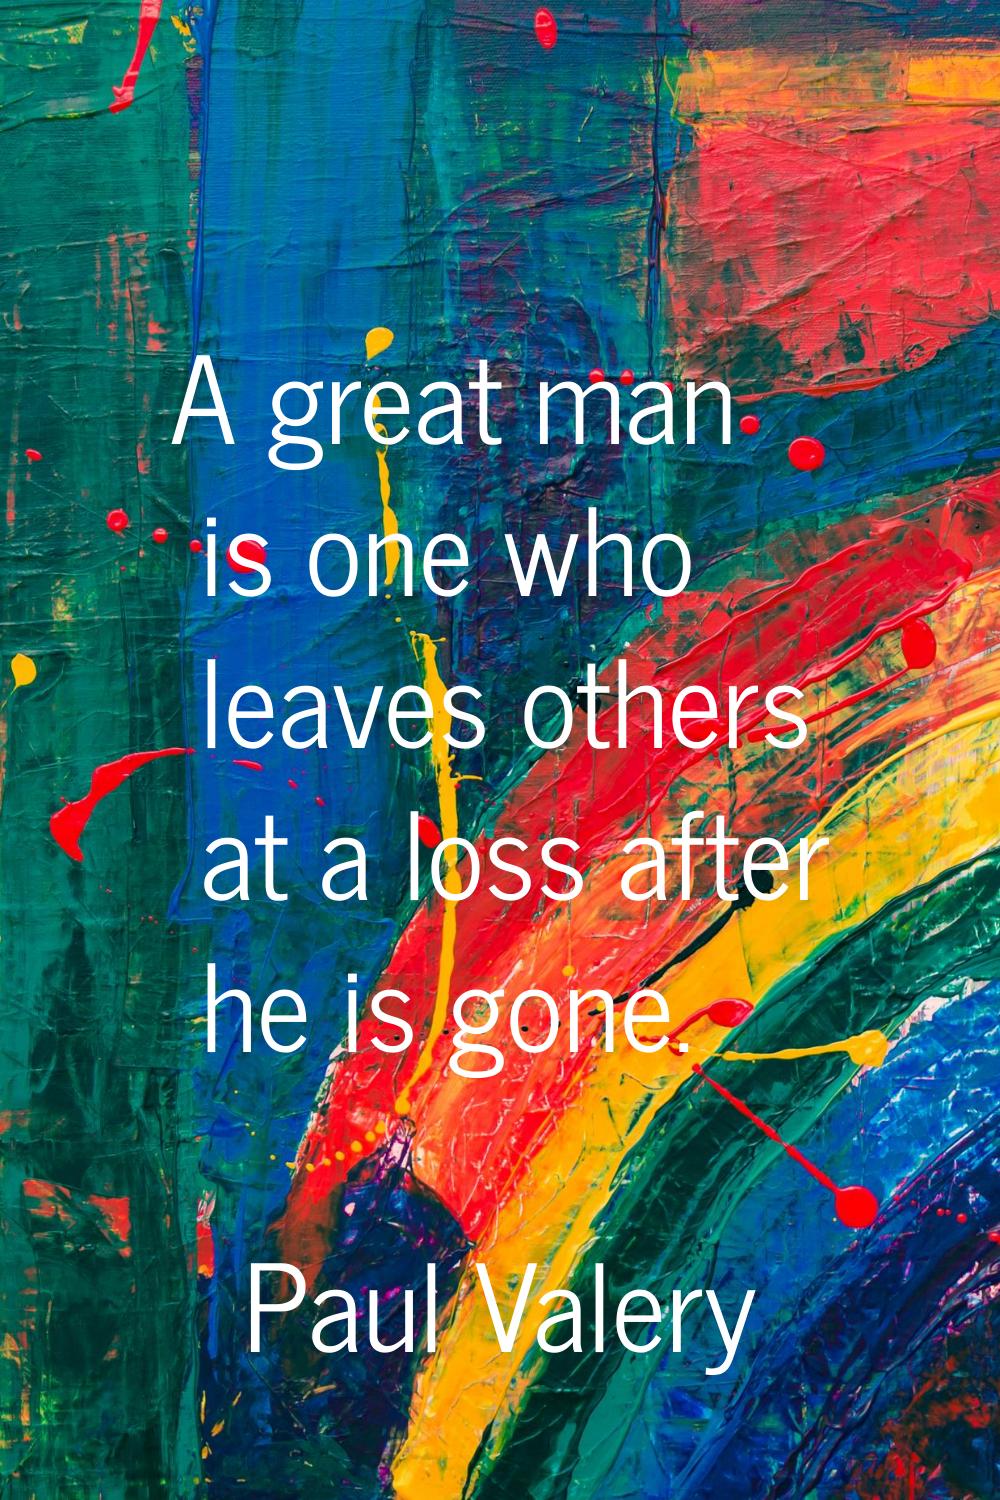 A great man is one who leaves others at a loss after he is gone.